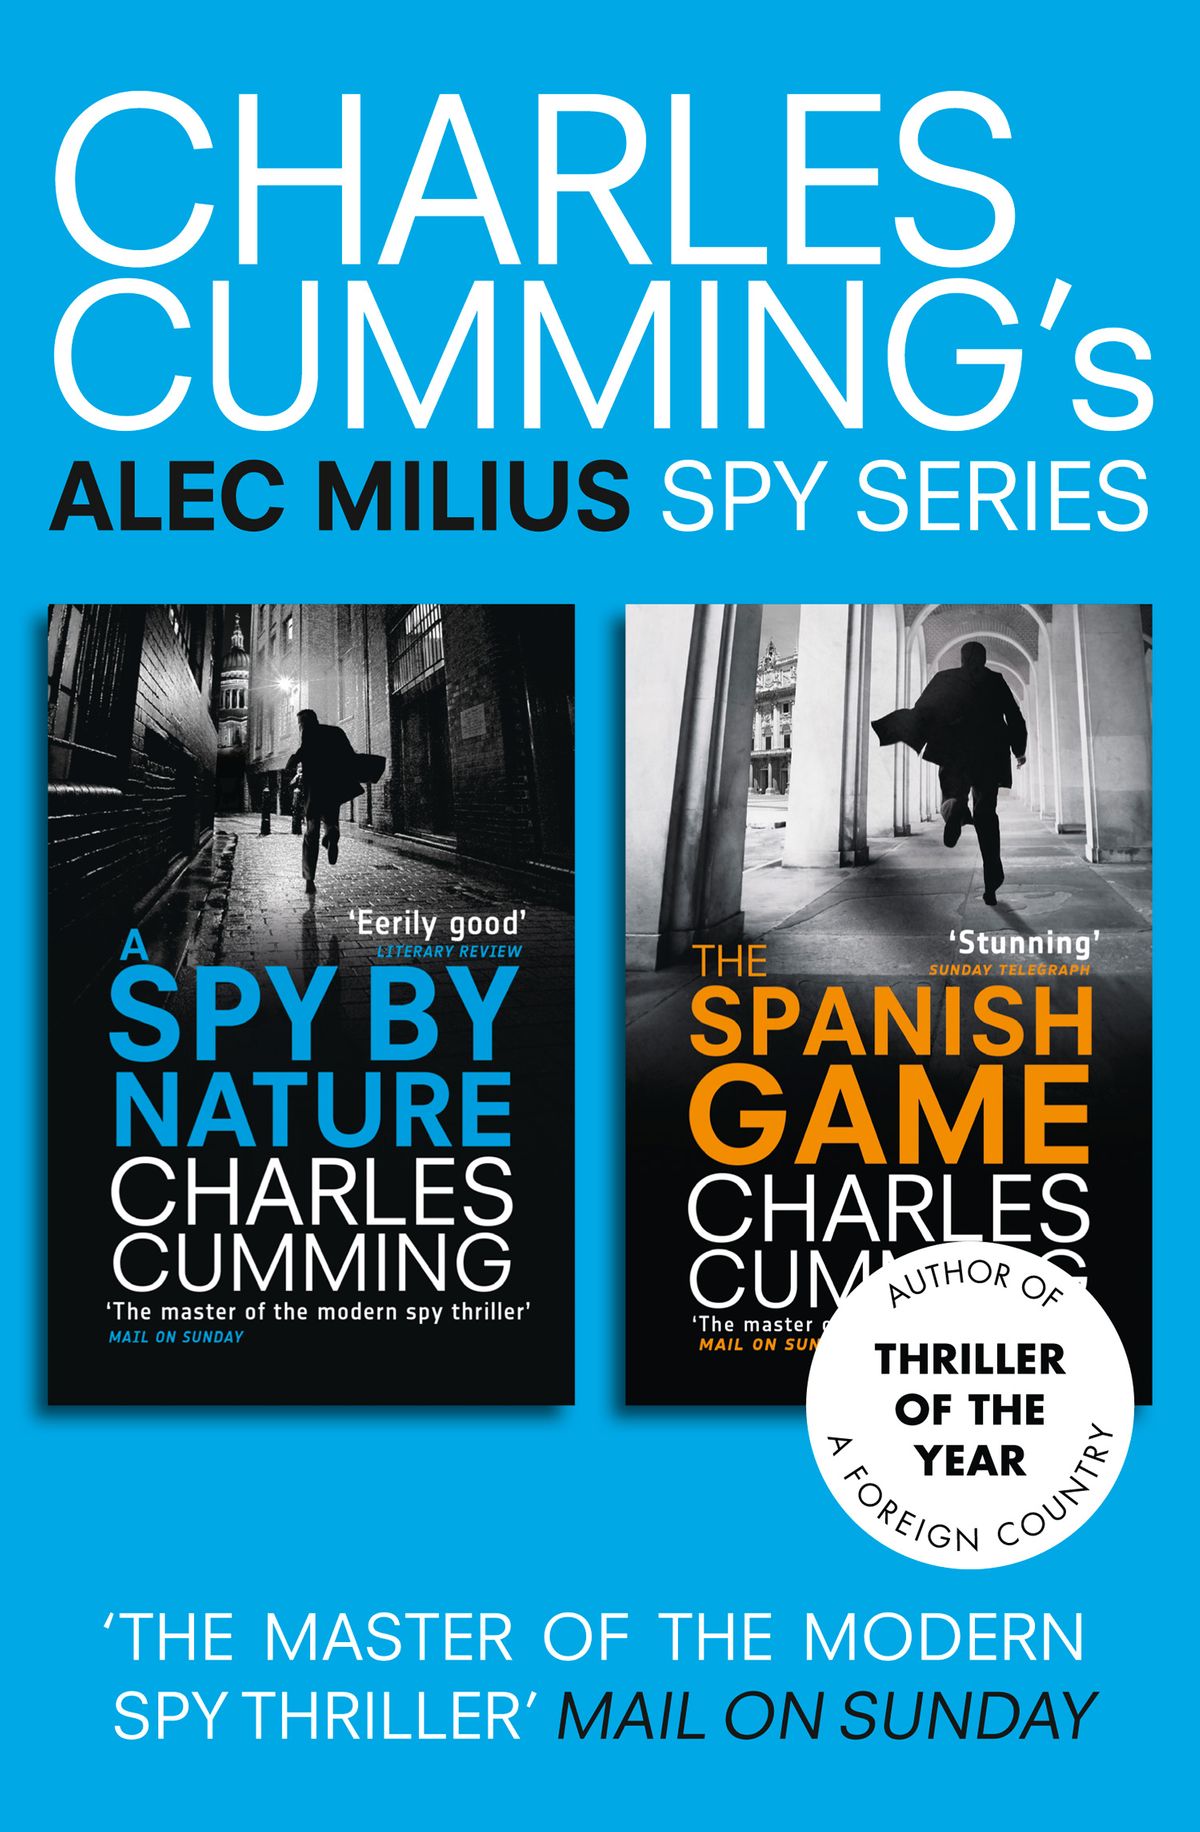 Alec Milius Spy Series Books 1 and 2: A Spy By Nature, The Spanish Game